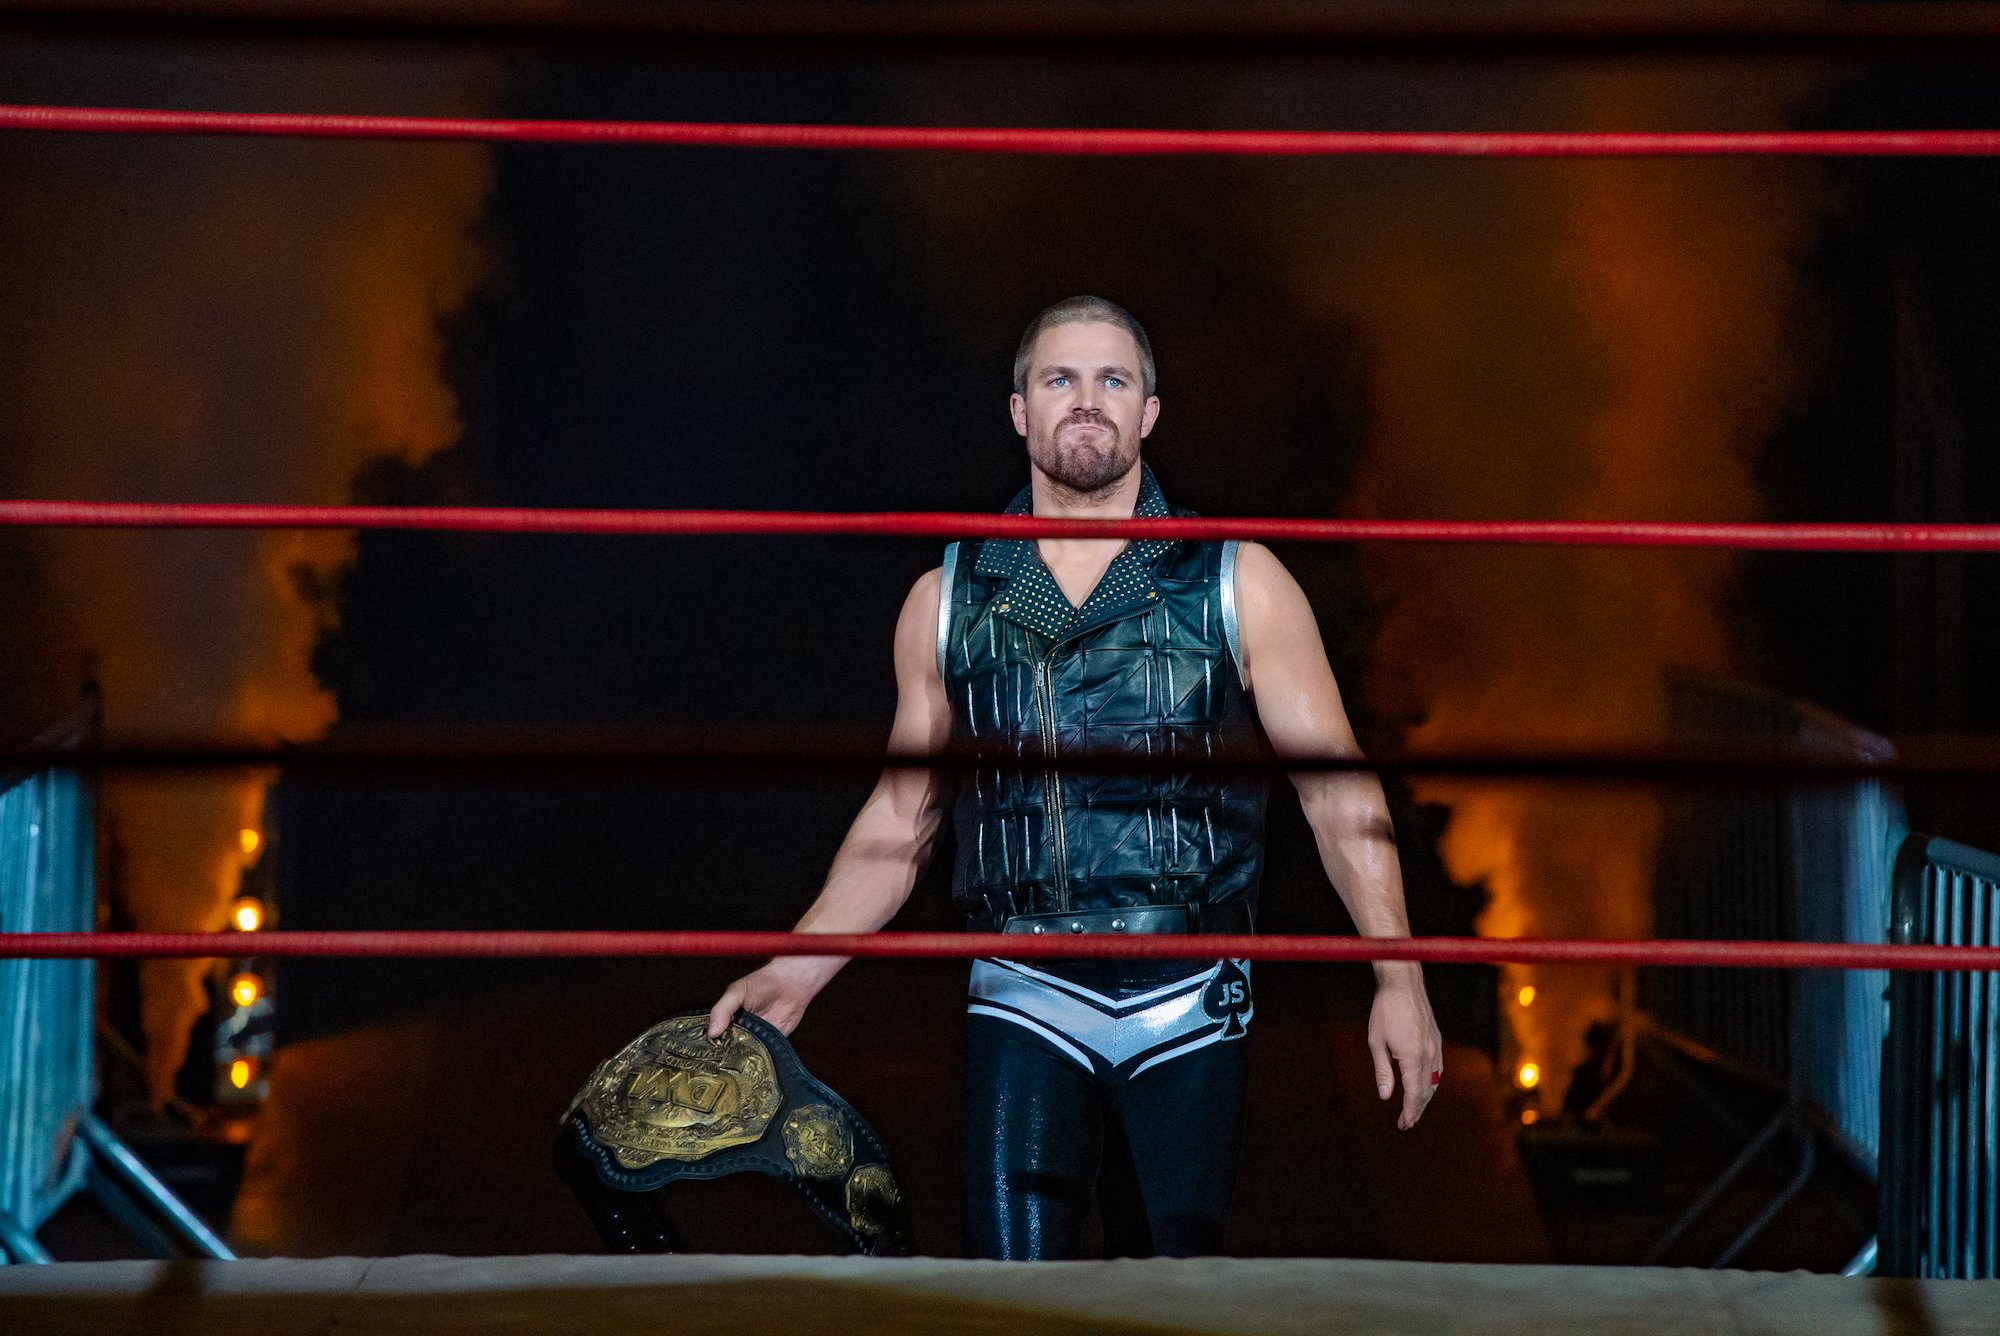 Heels: Stephen Amell carries the belt into the ring